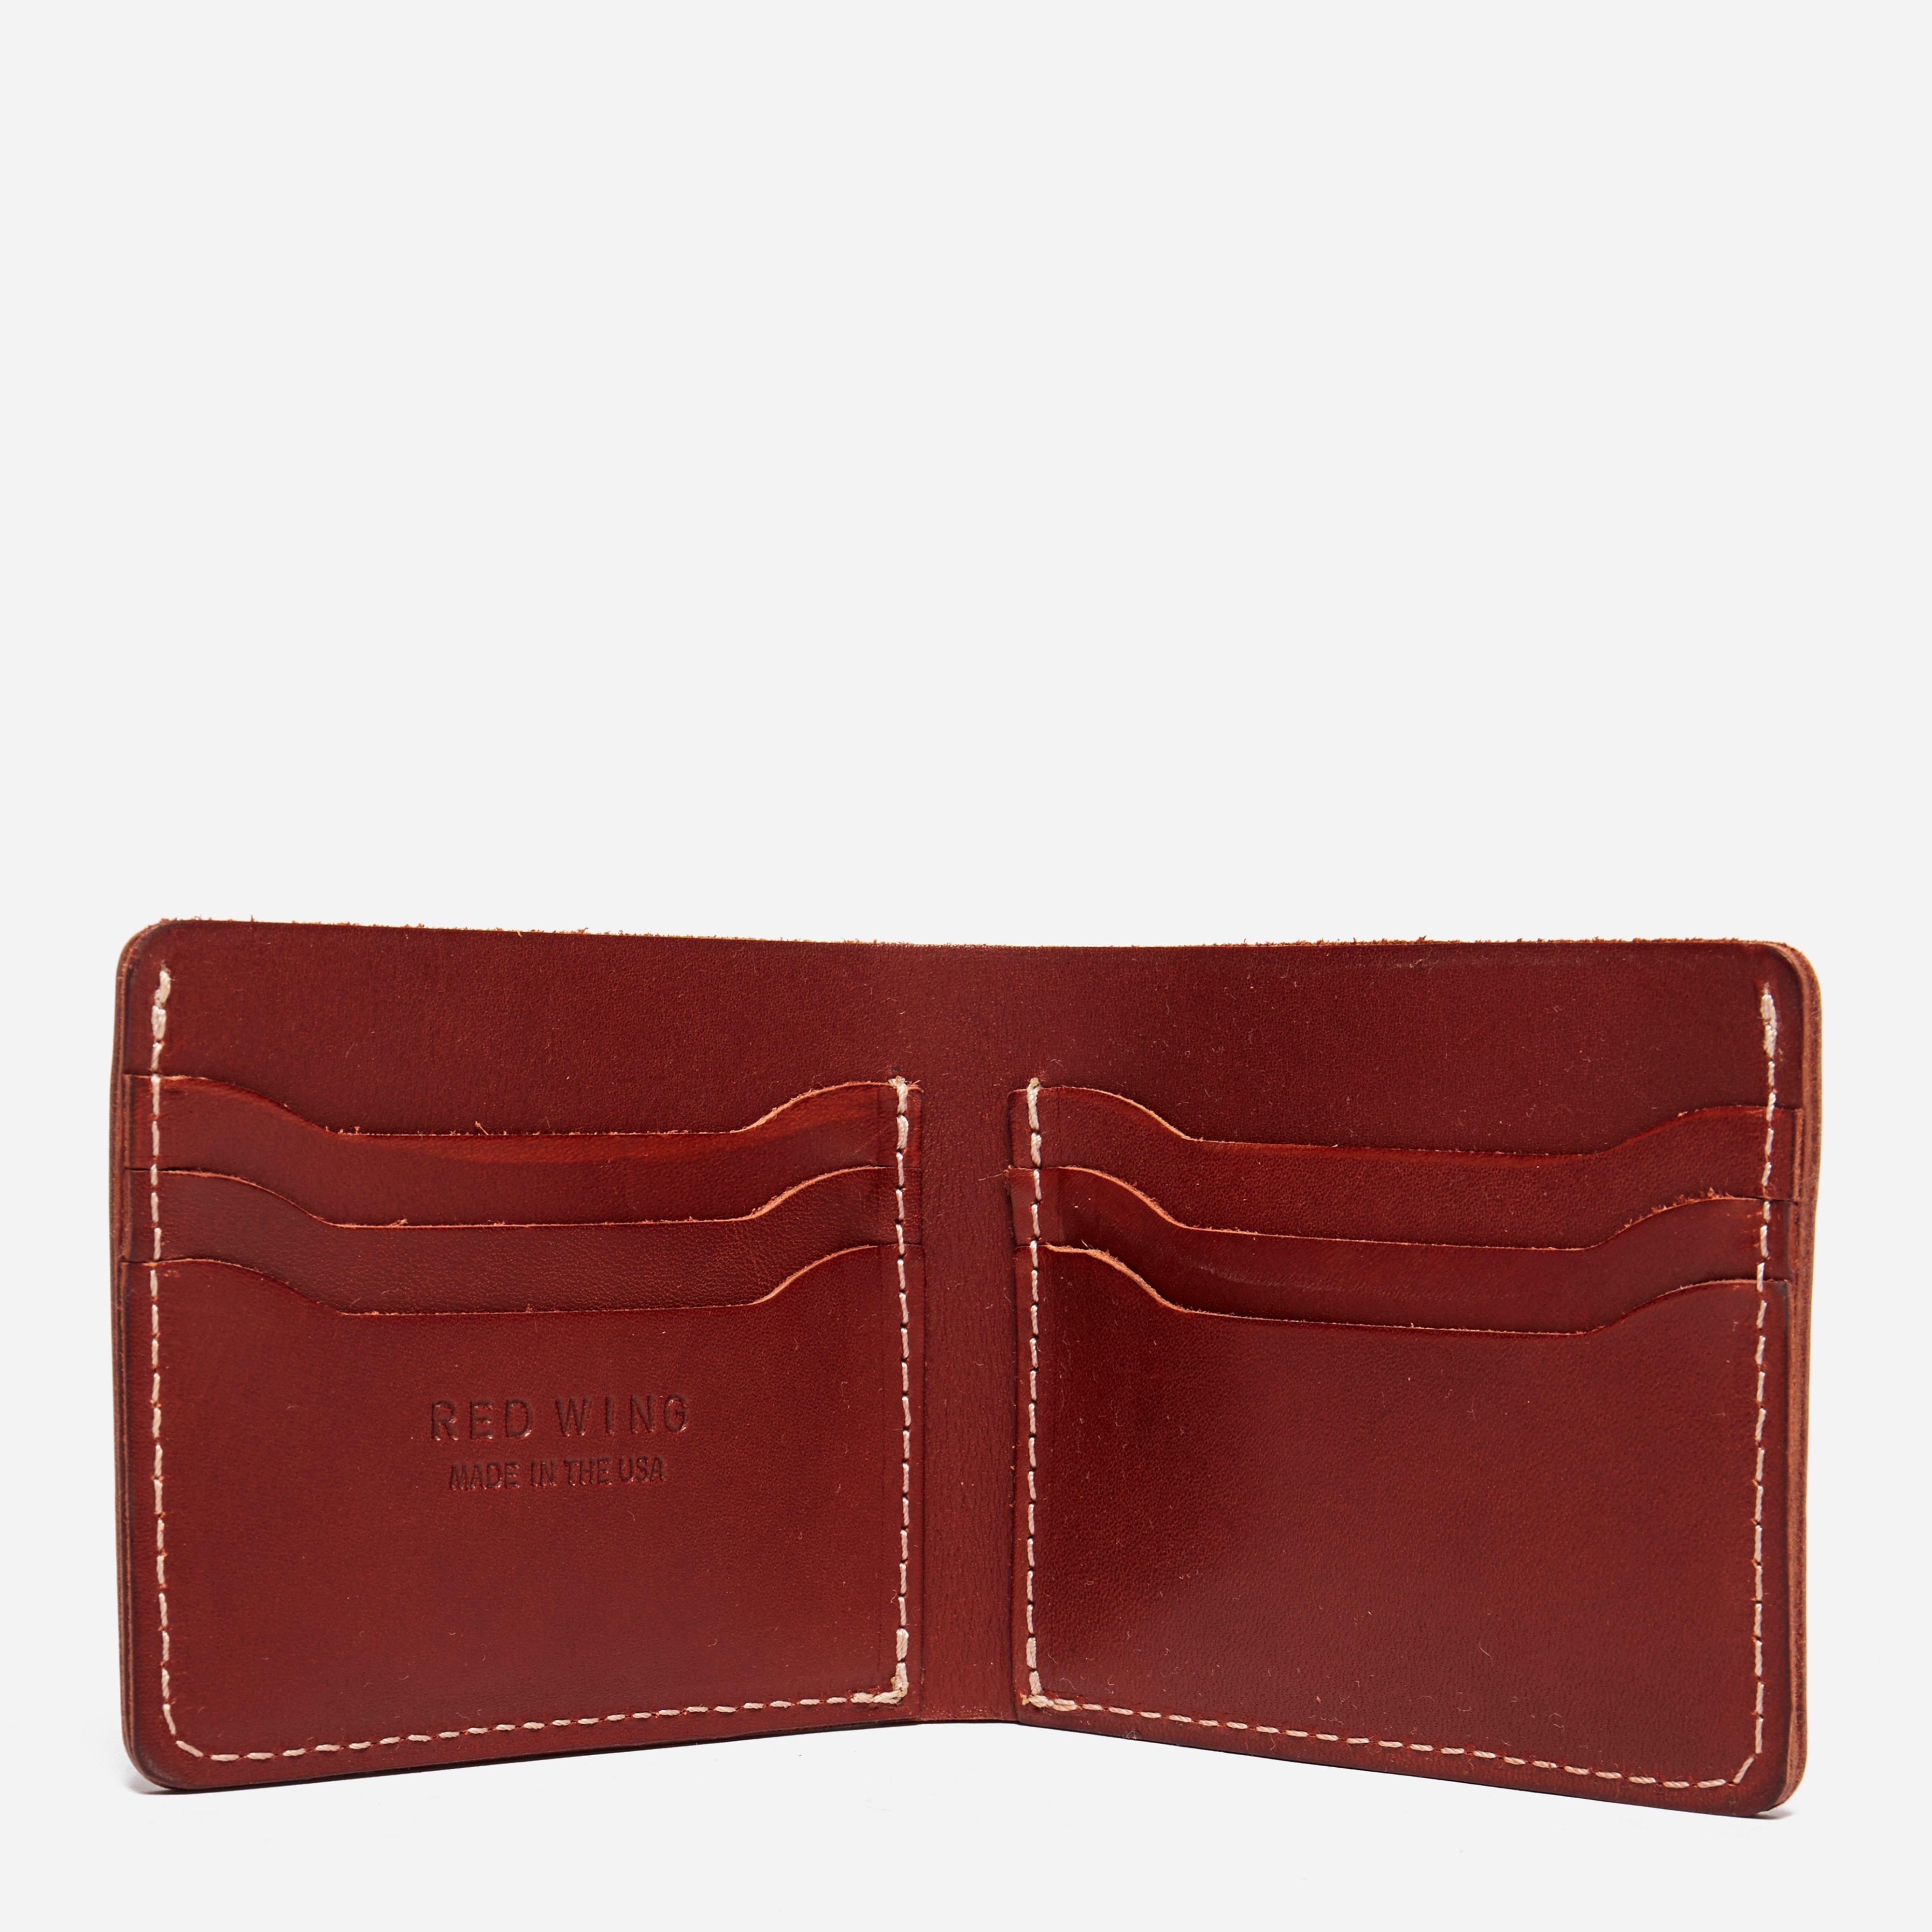 Red Wing Classic Bifold Wallet in Red for Men - Lyst